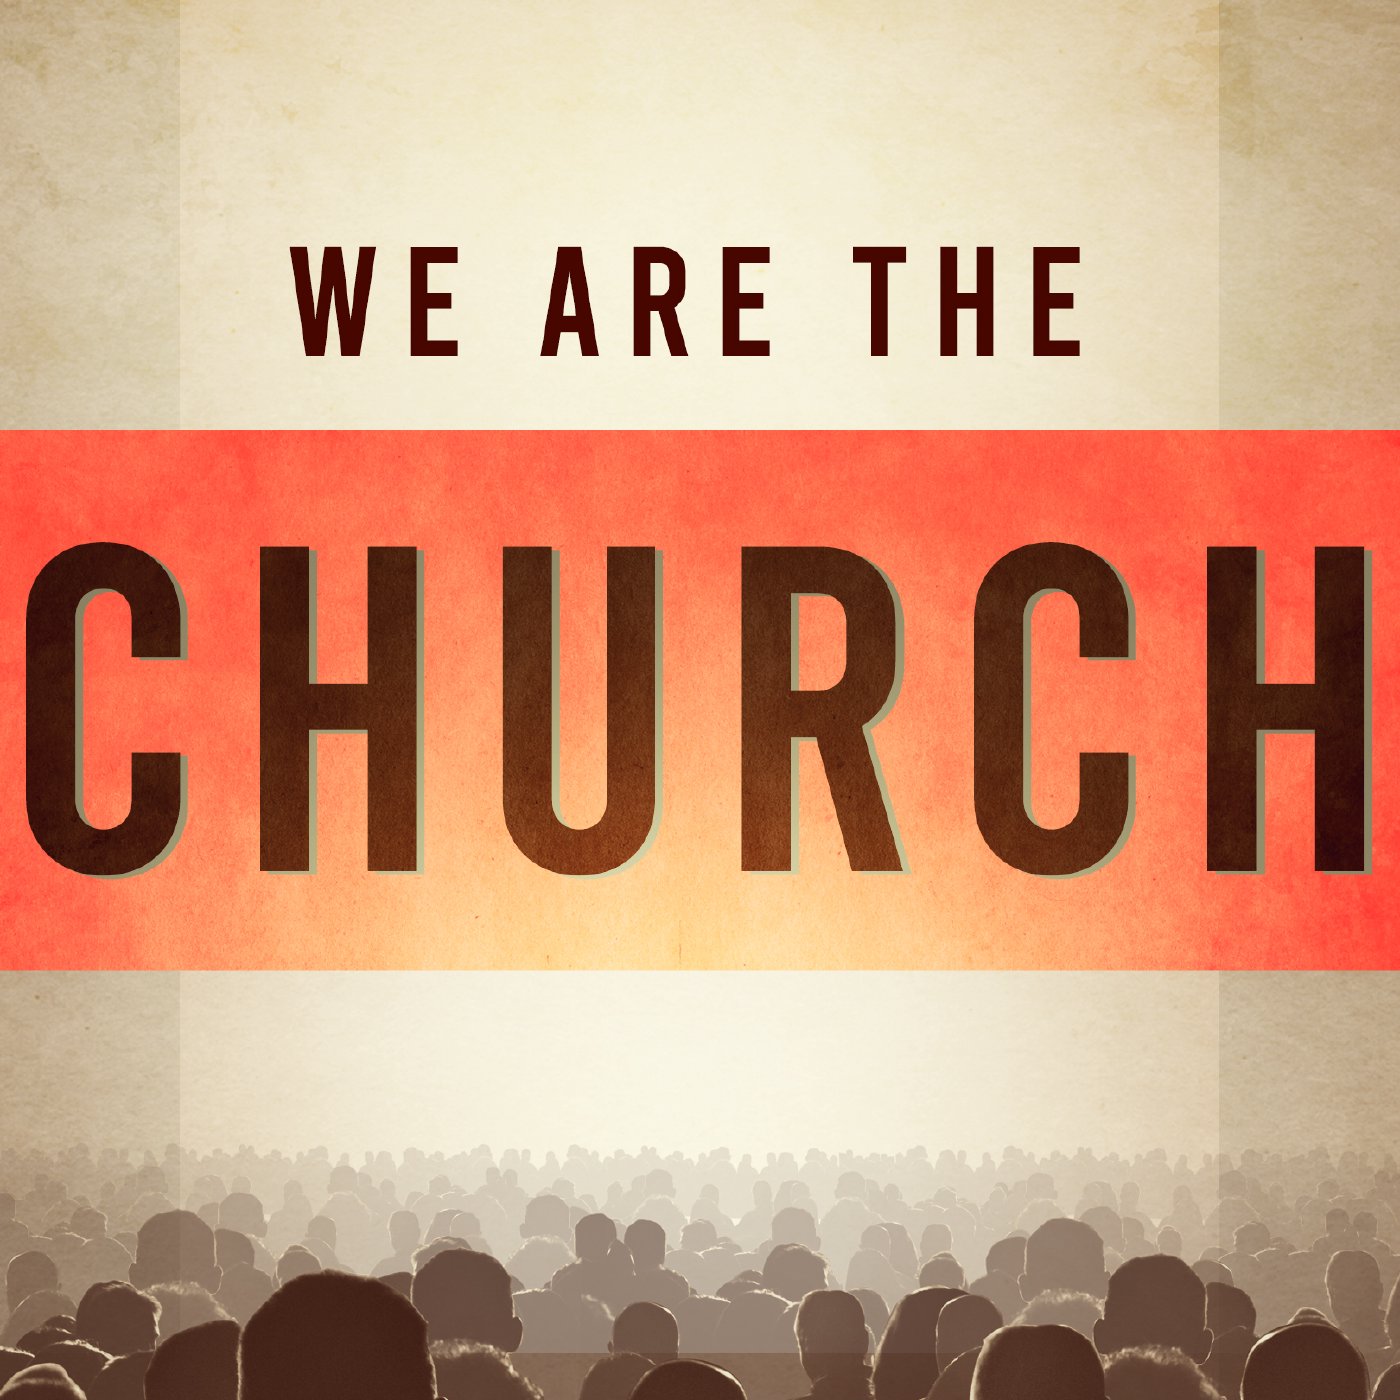 We Are the Church: Standing